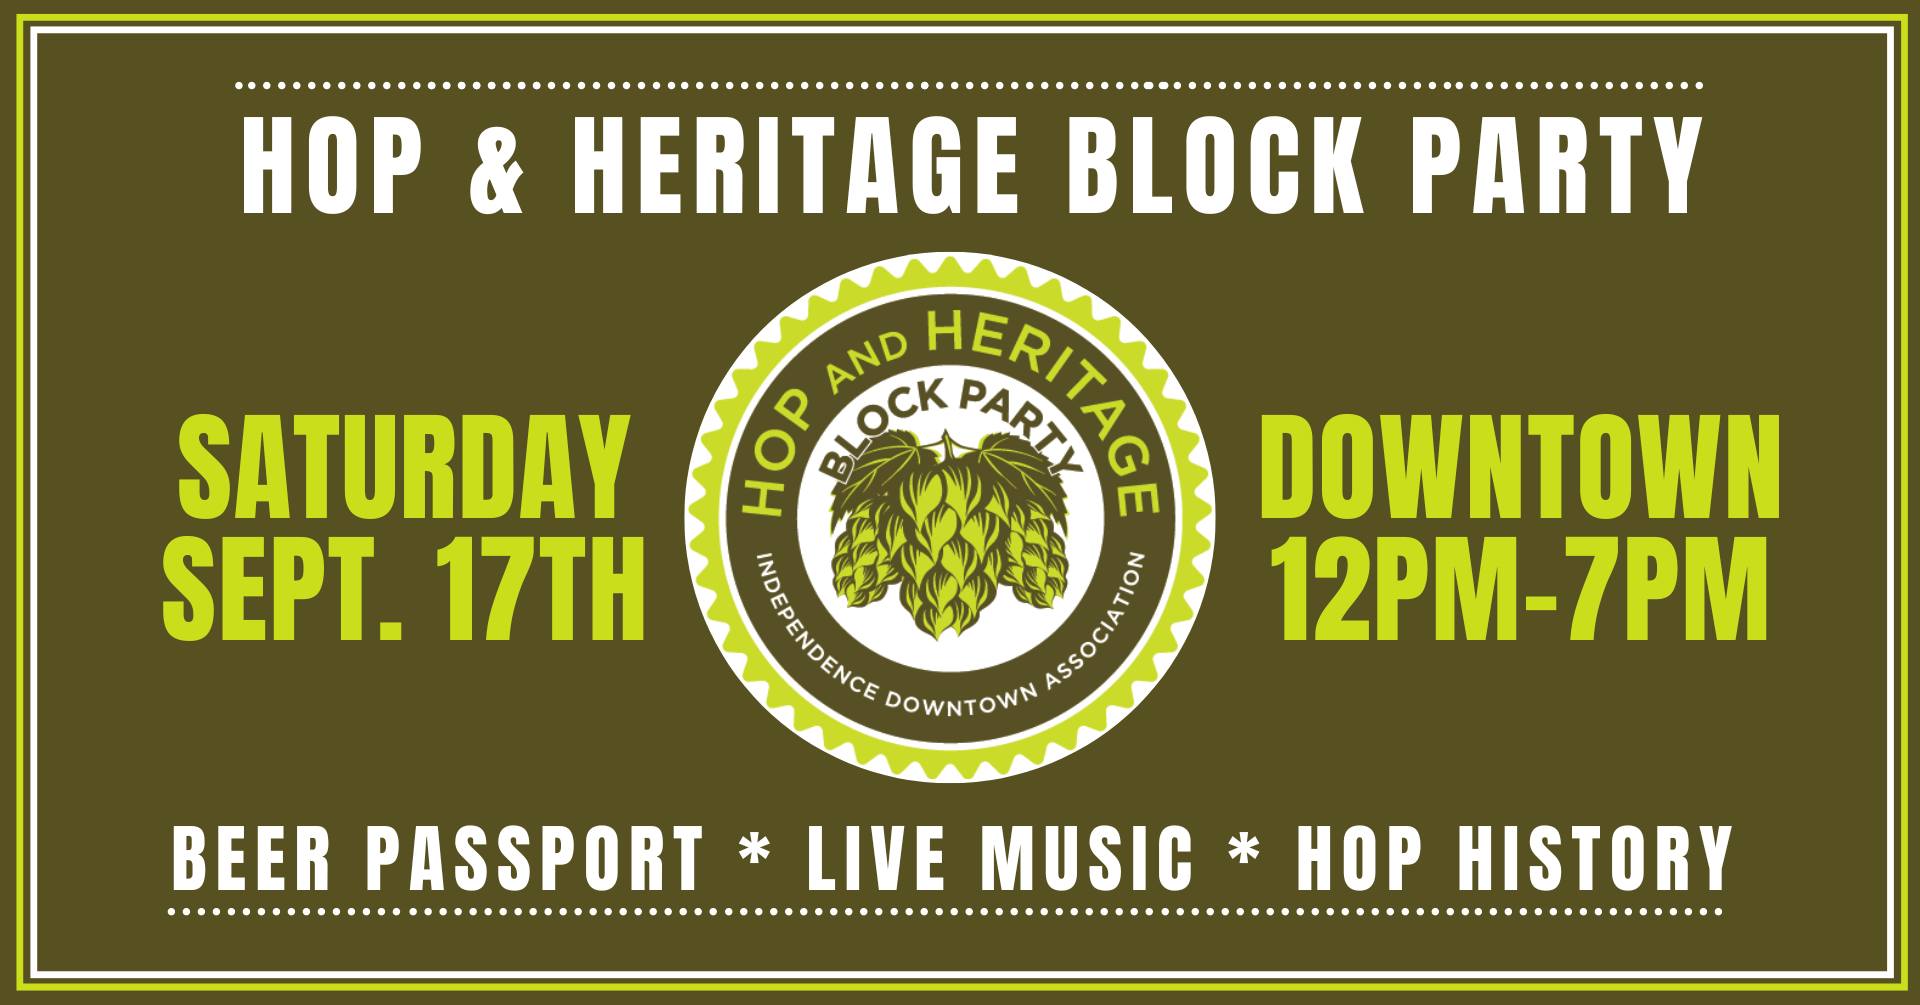 A banner promoting the hop festival